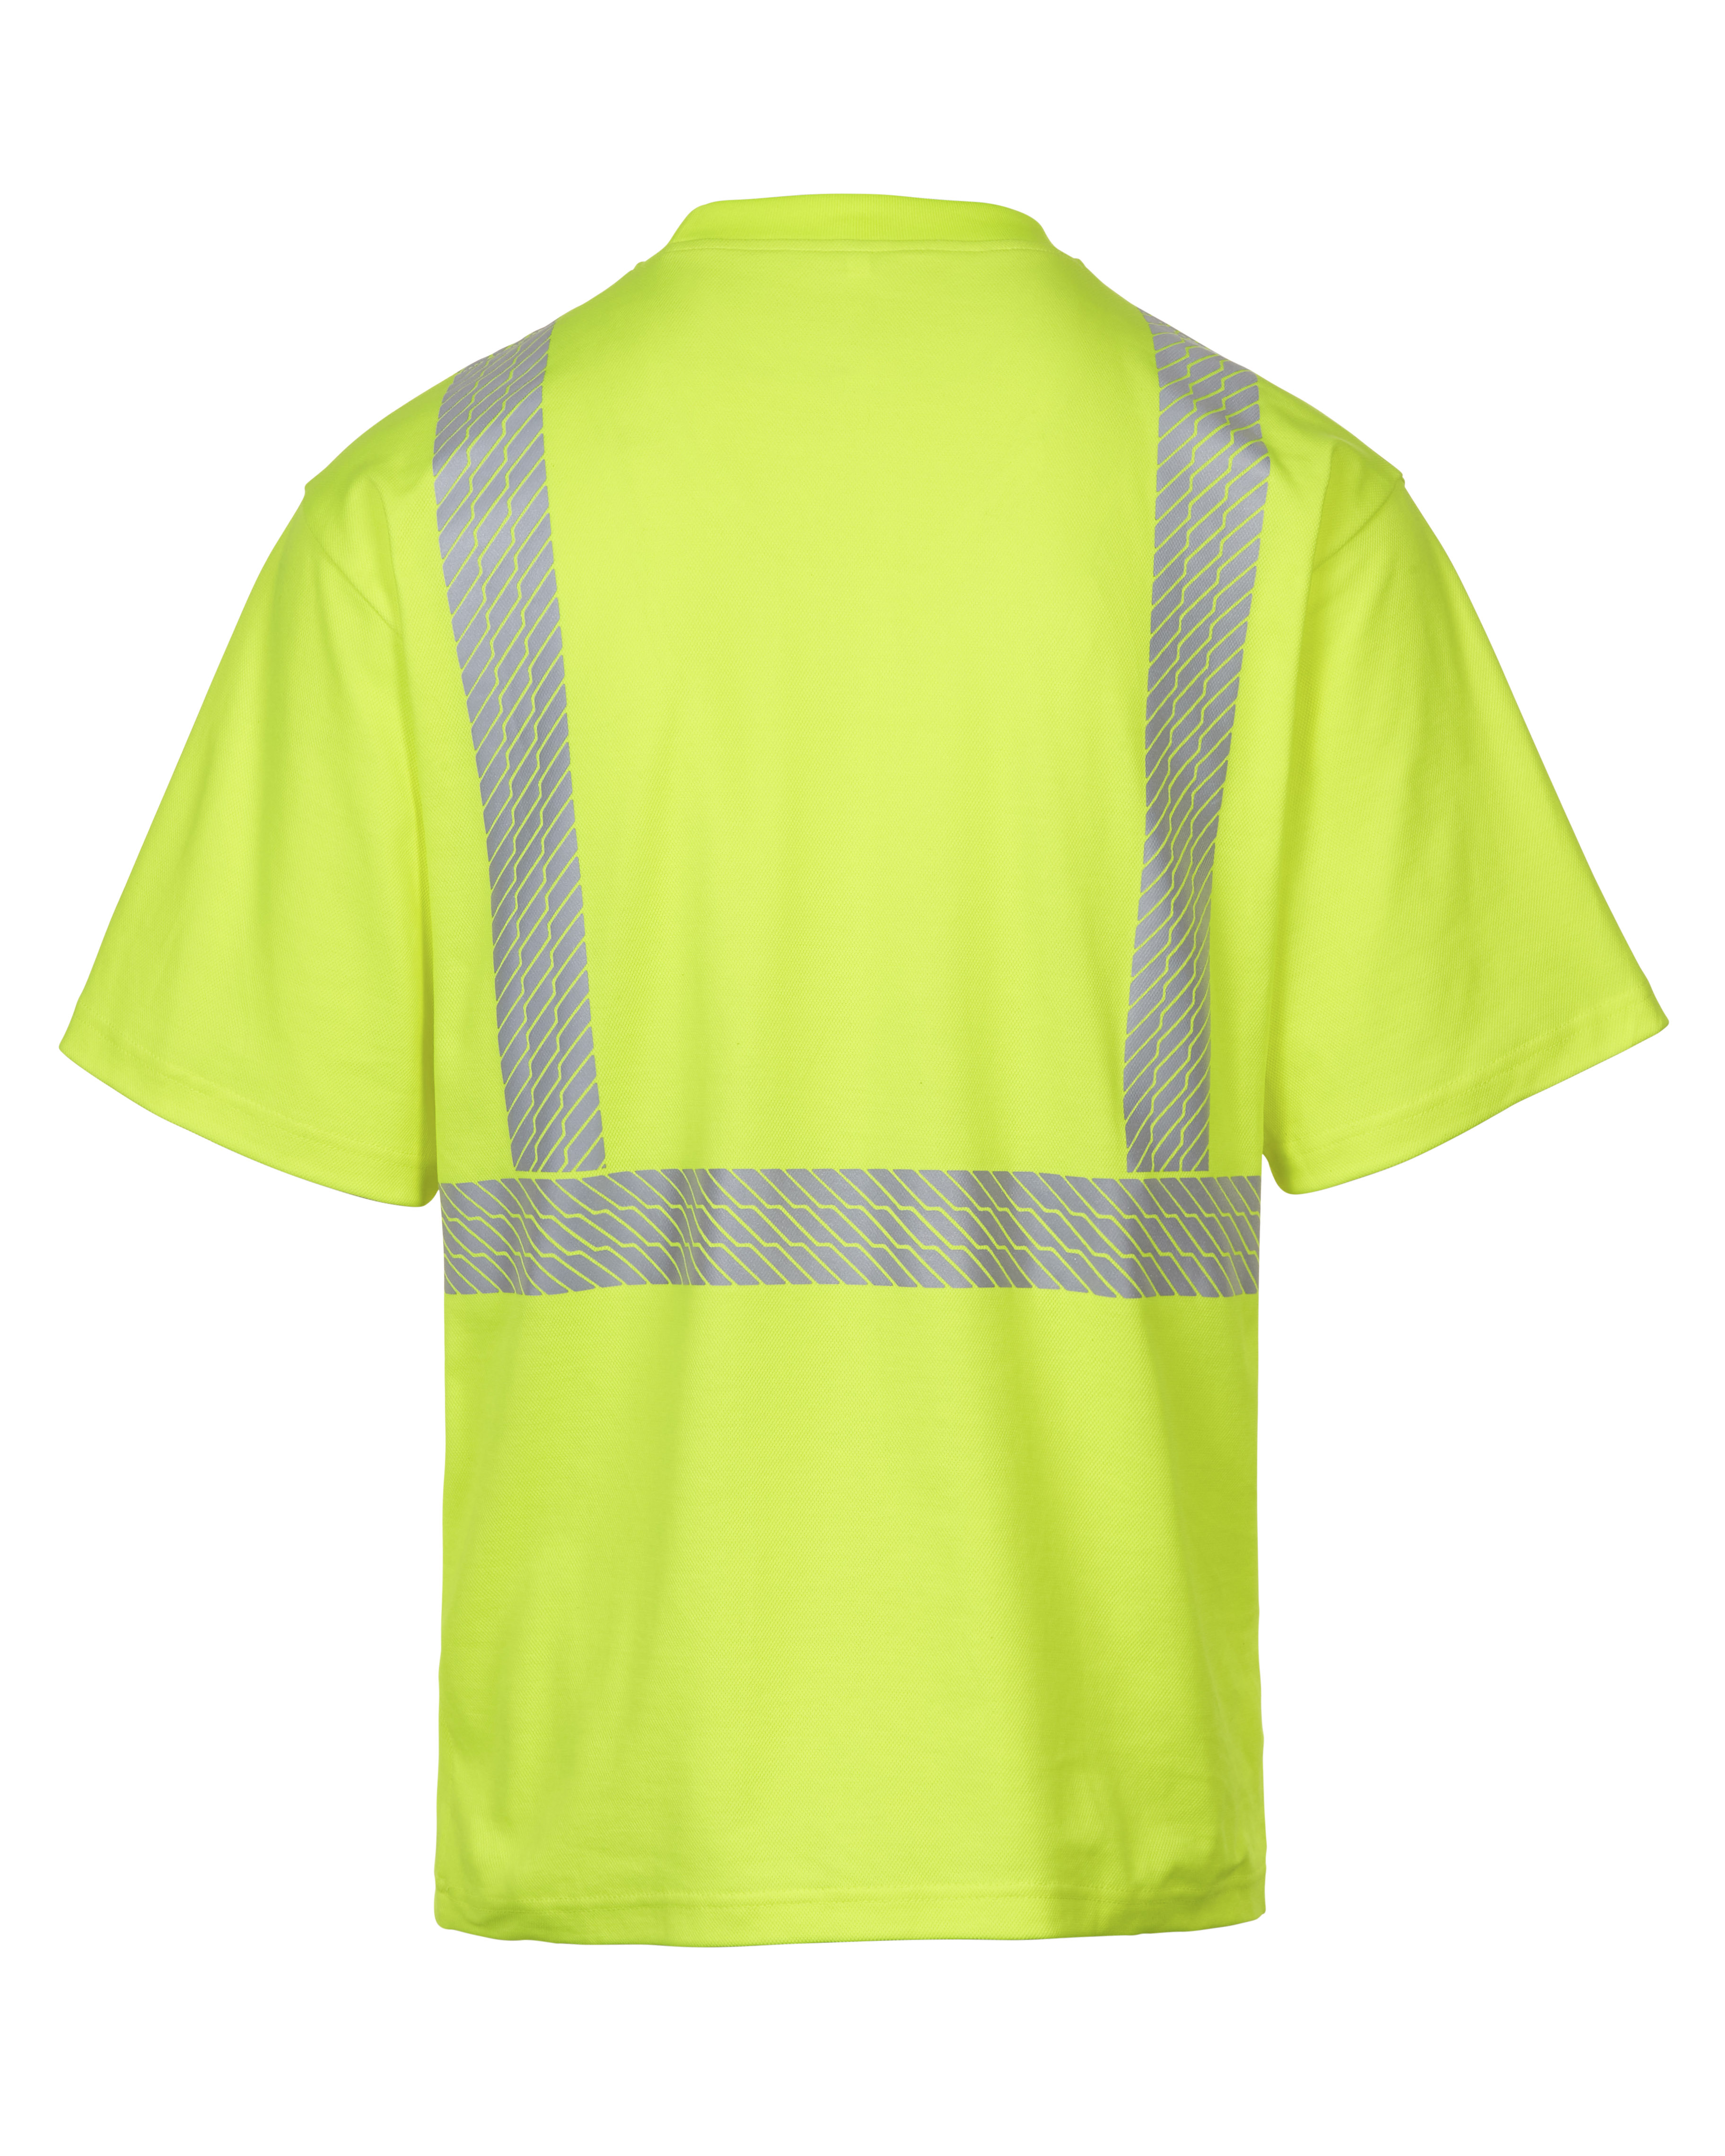 Picture of Max Apparel MAX412 Cotton Rich Class 2 T-shirt, Safety Green